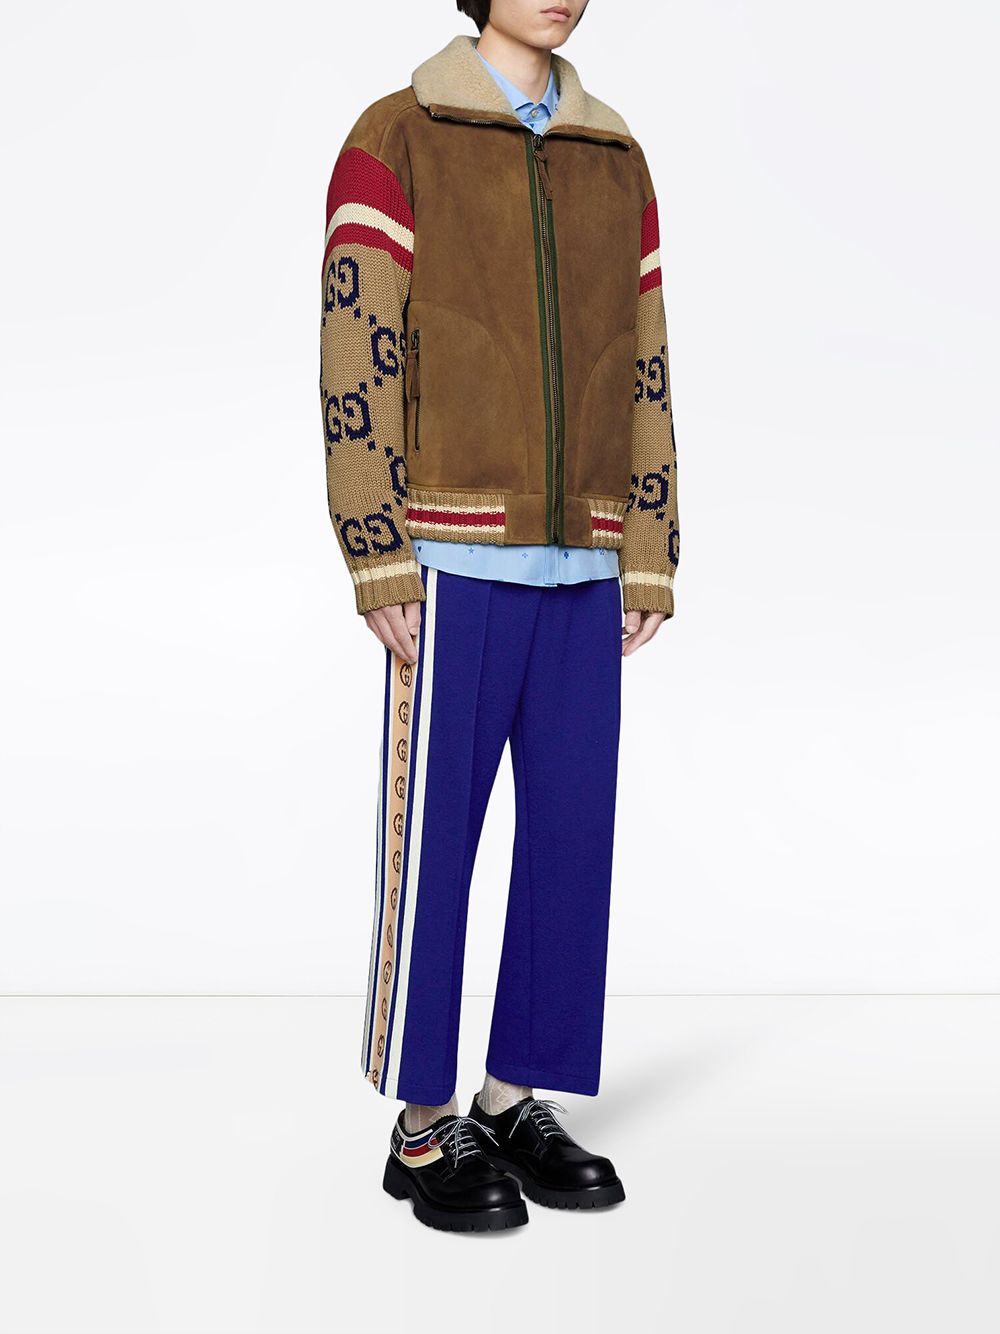 Gucci Knitted Sleeve Shearling Suede Jacket - Farfetch